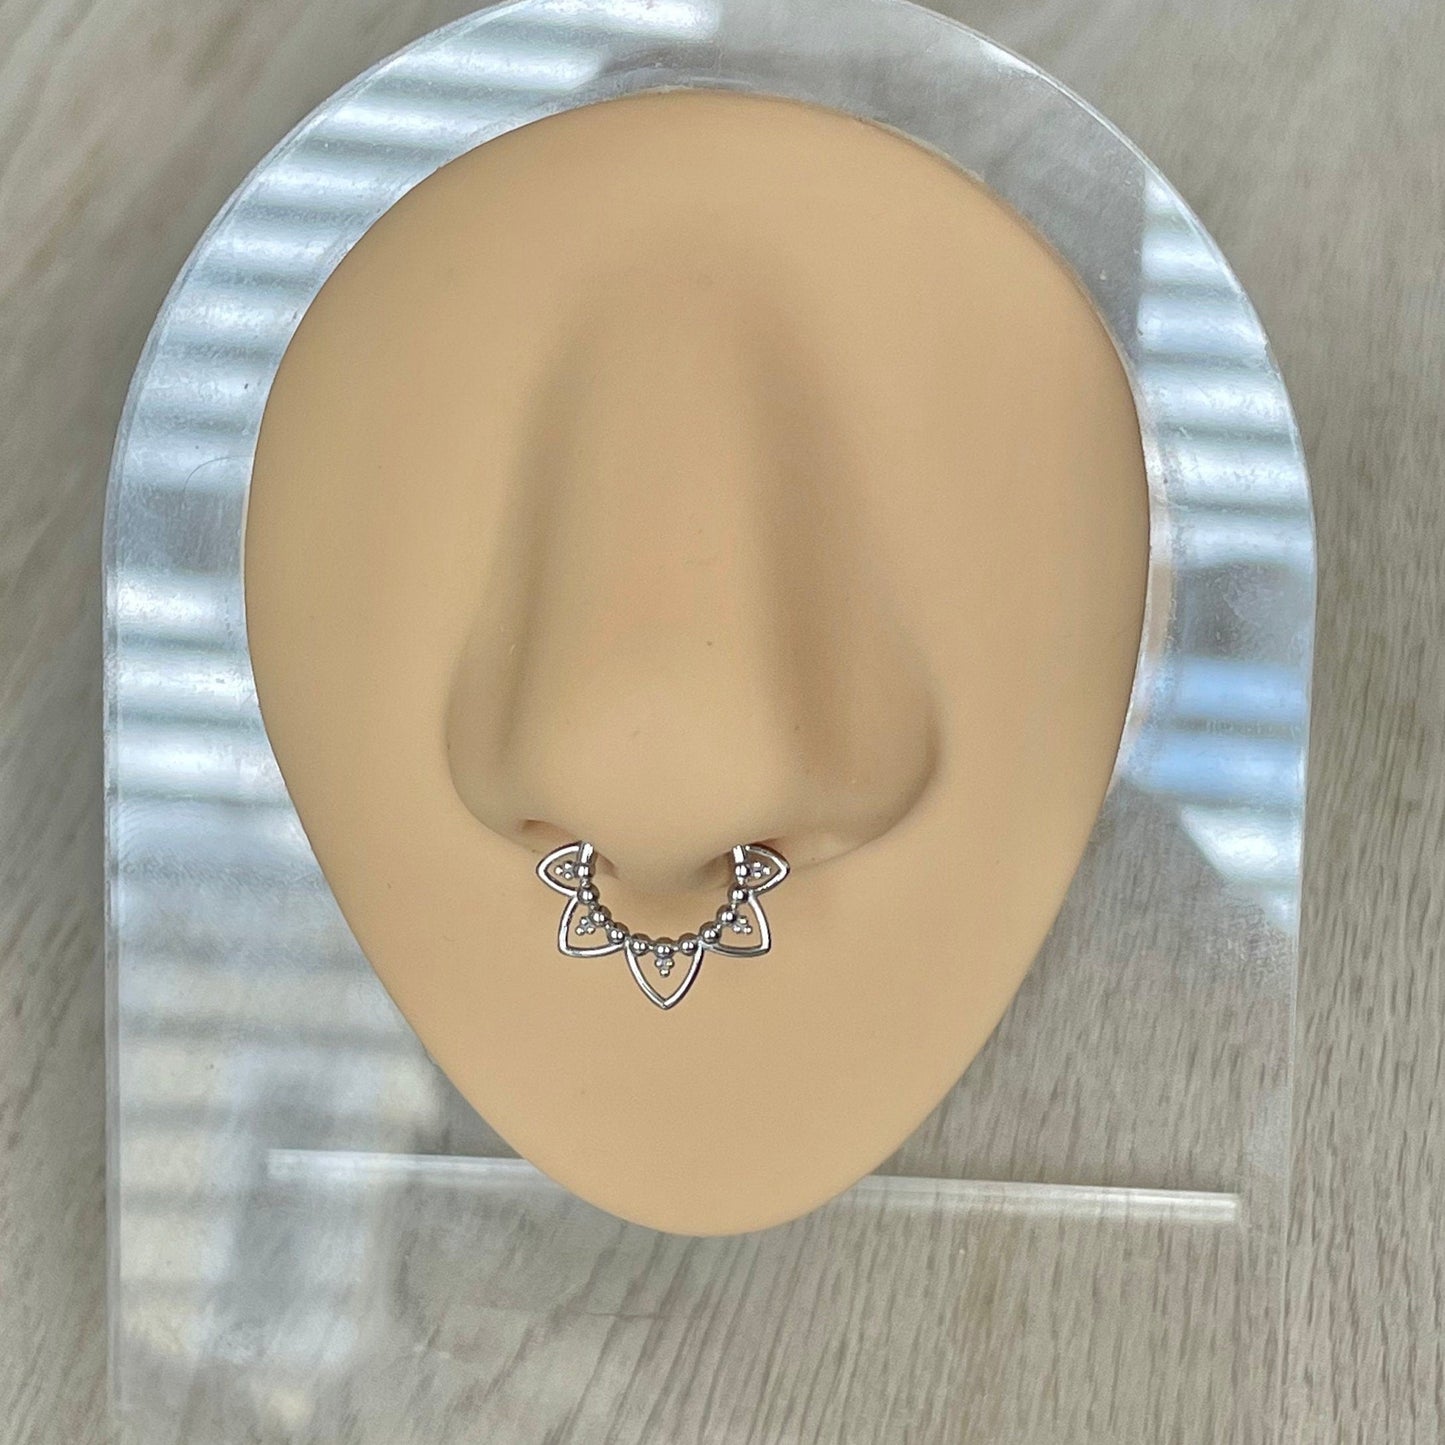 Solid White Gold Septum Jewelry Piercing (16G, 8mm, 14k Solid White or Yellow Gold)